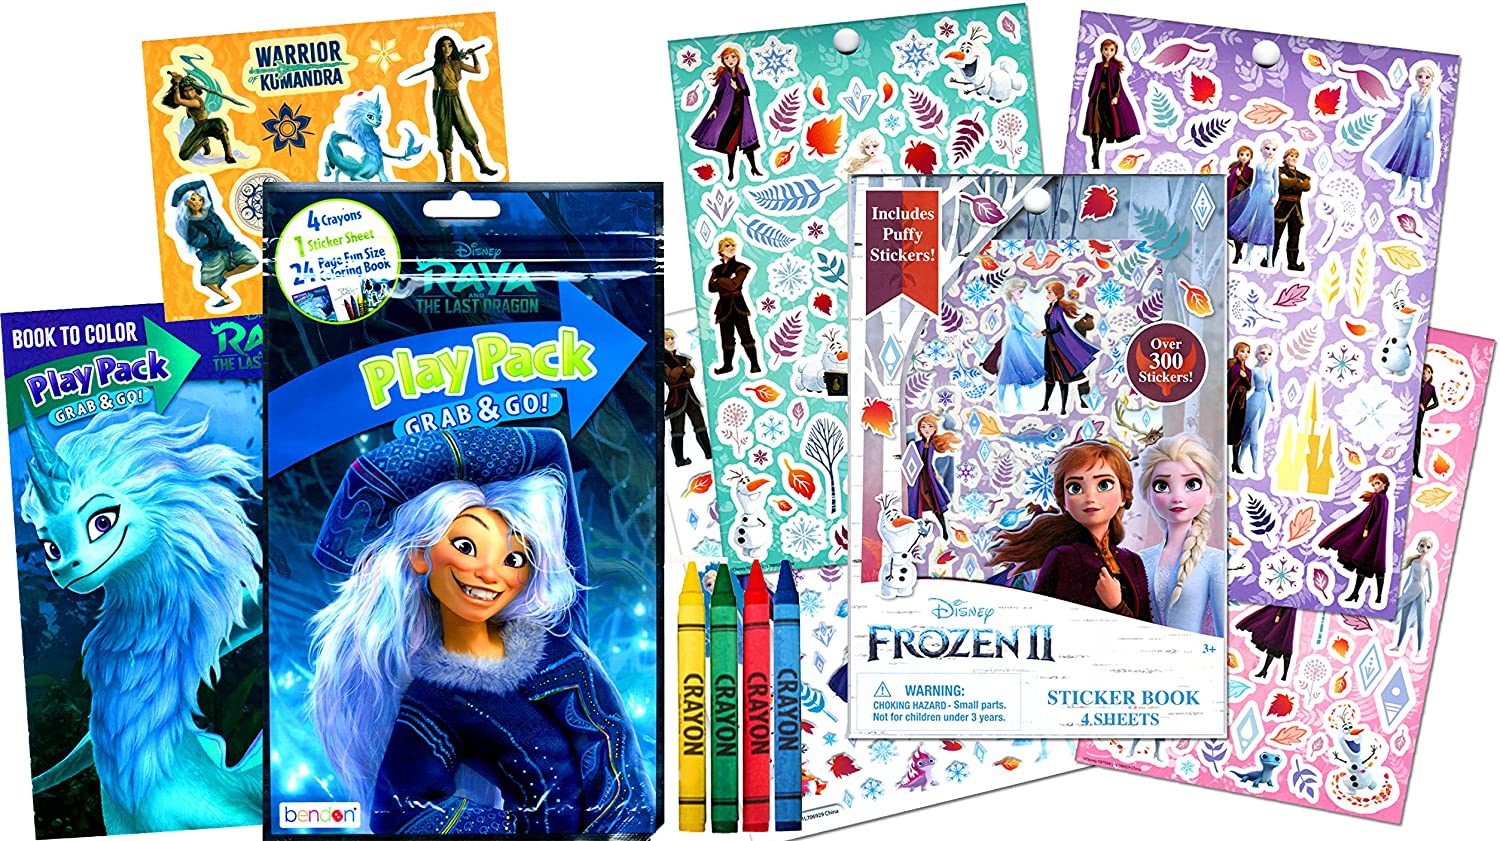 Disney Princess Coloring Book Set for Kids front pages